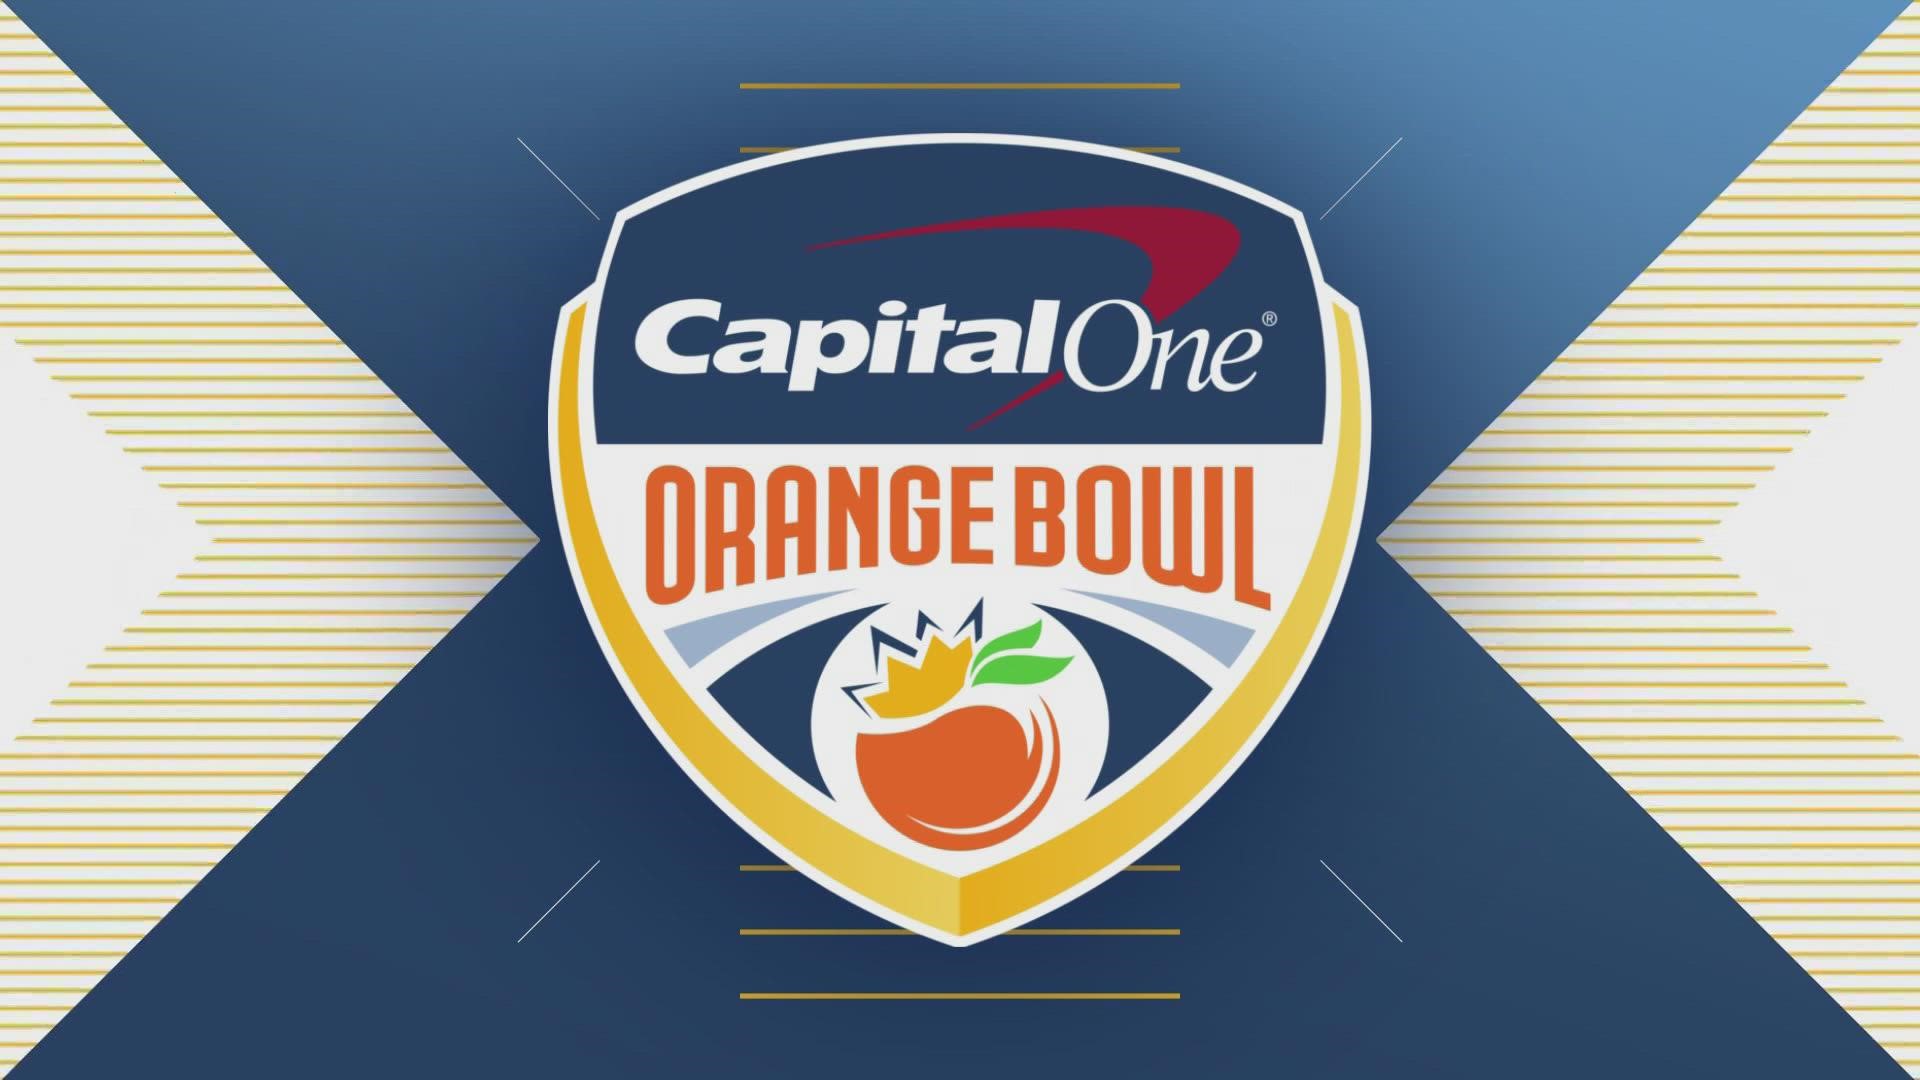 With the Orange Bowl happening in Miami, there are parties across Tennessee cheering for their team.